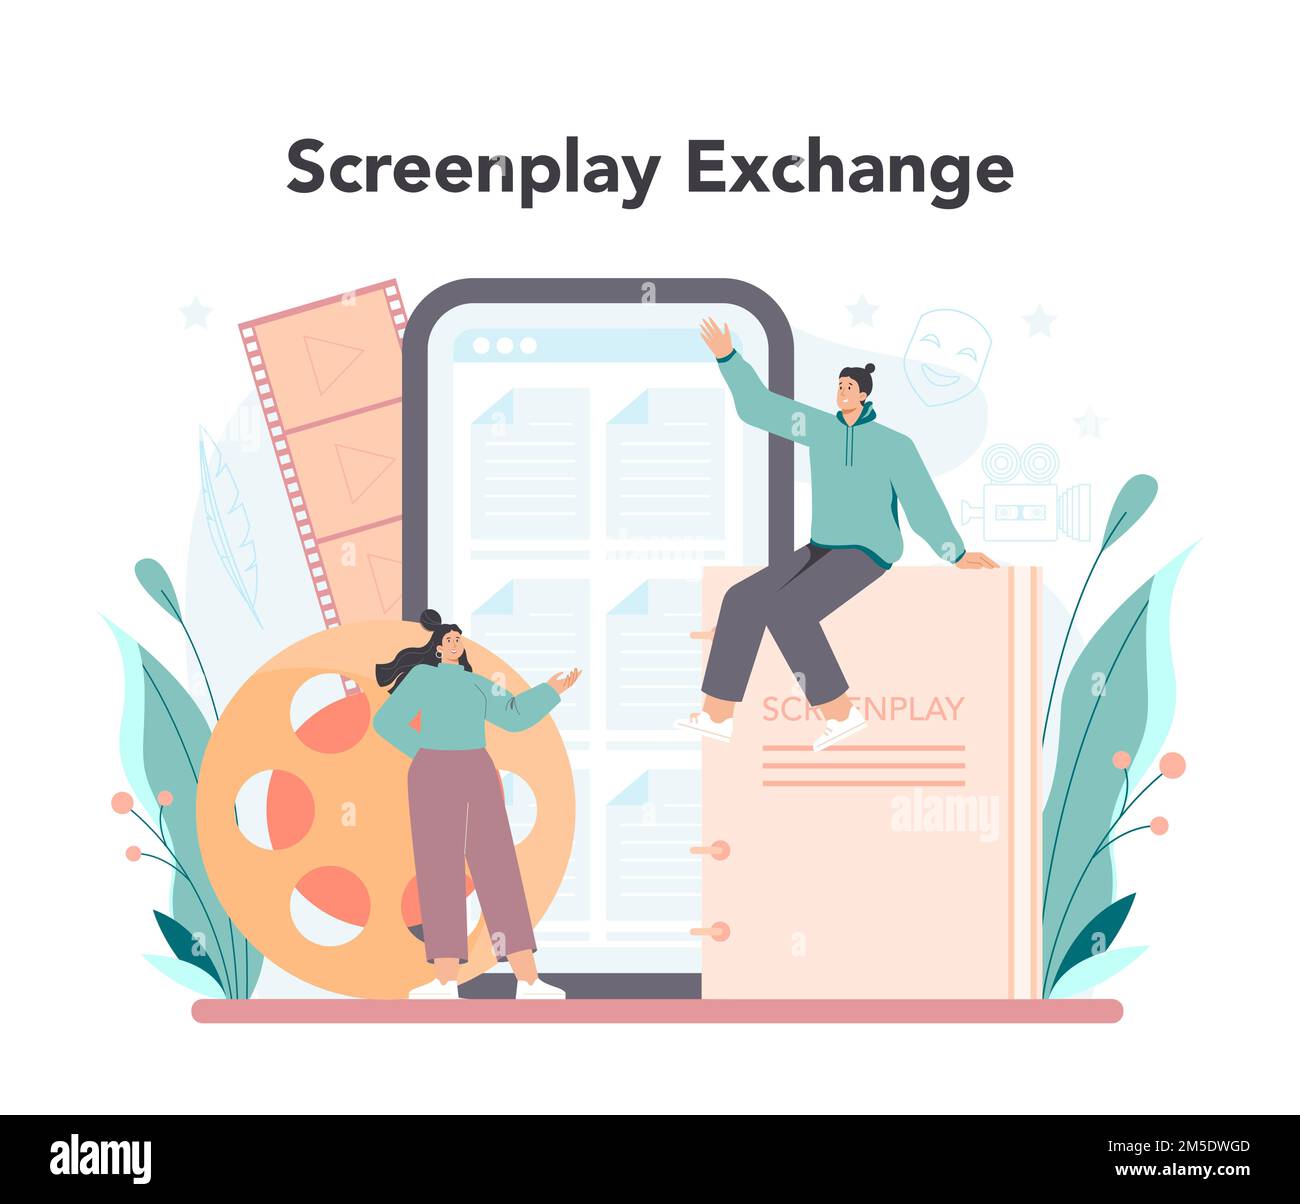 Screenwriter online service or platform. Playwright create a screenplay for movie. Online screenplay exchange. Isolated vector illustration Stock Vector